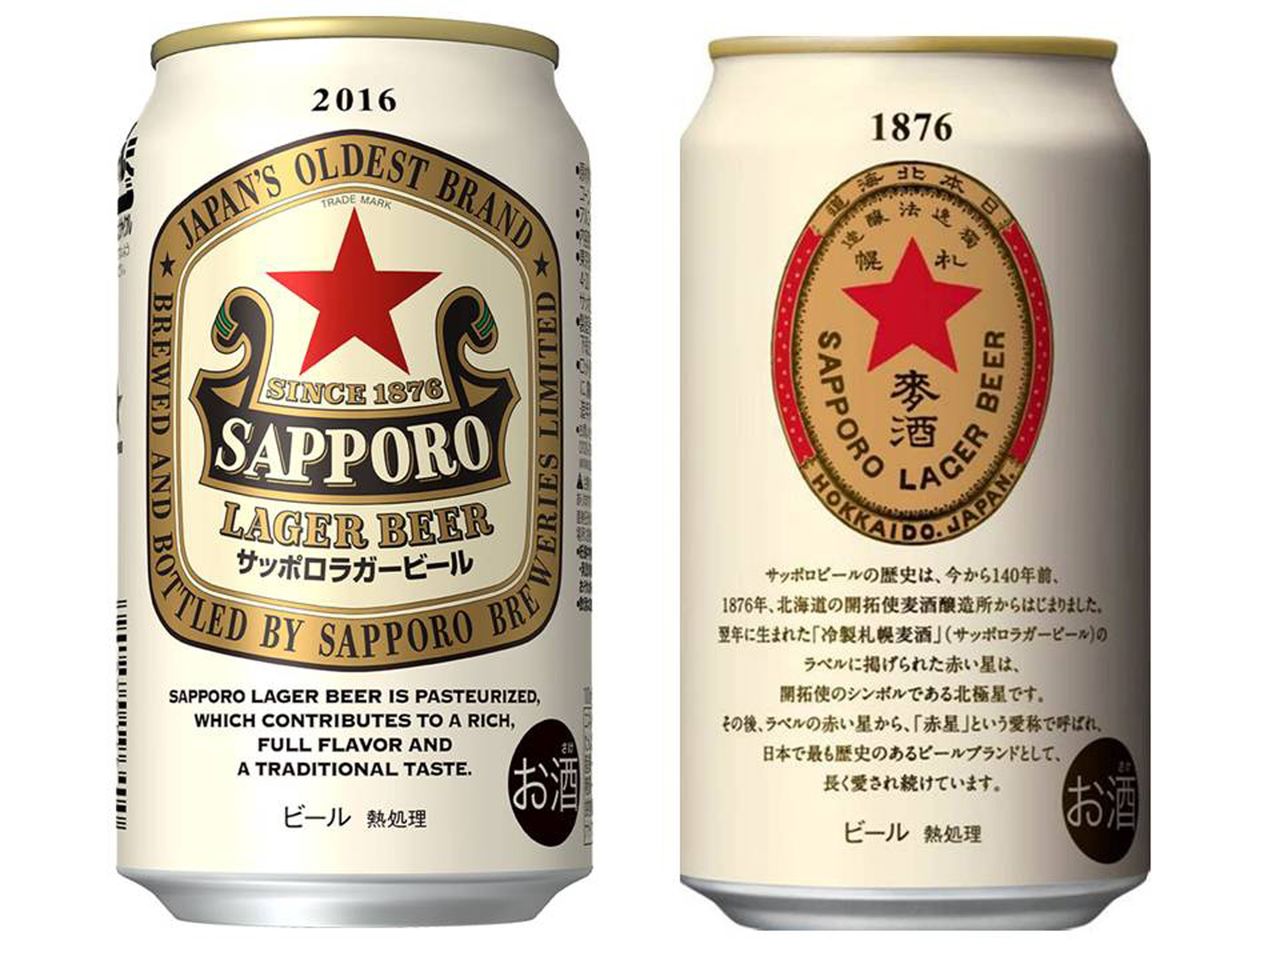 Limited edition versions of Sapporo Beer products feature a red star. (© Jiji)